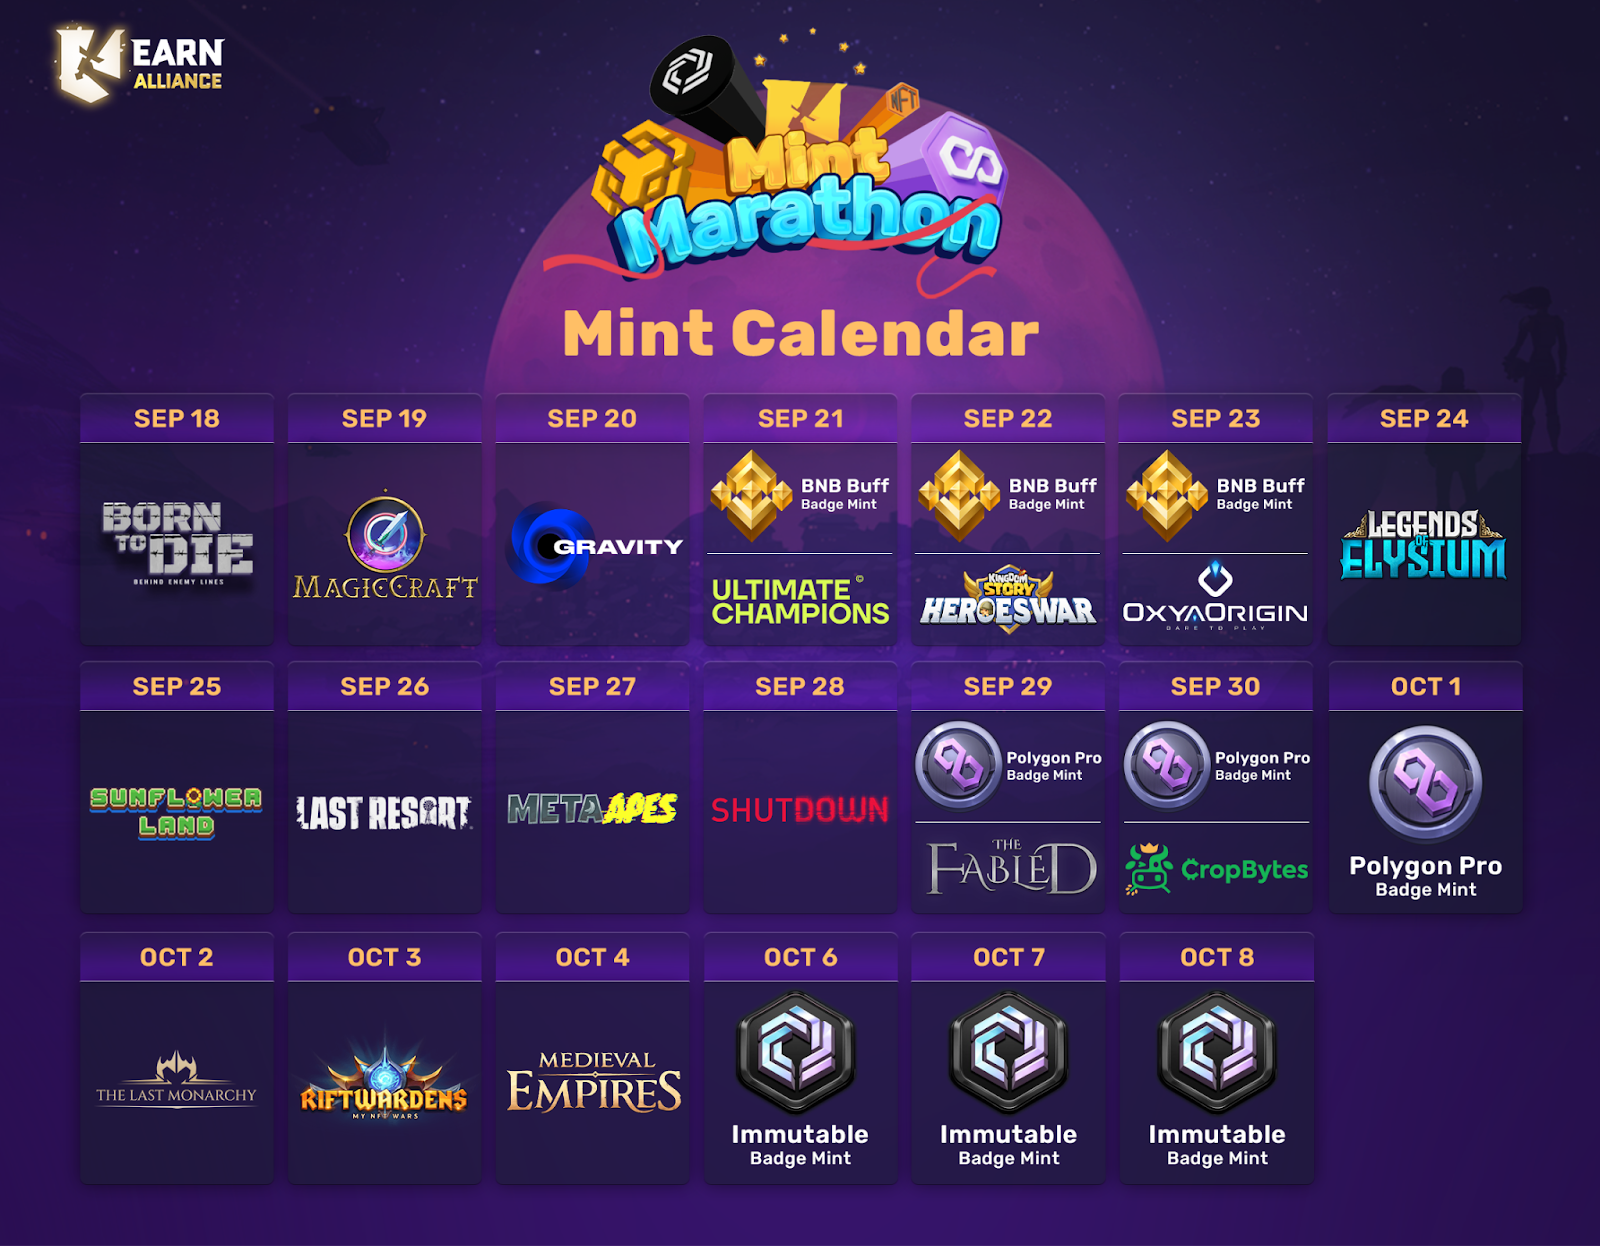 Earn Alliance Launches the Biggest Web3 Game Mint Marathon: Over 40,000 Free NFTs Featuring 16 Games from Binance, Polygon, and Immutable 